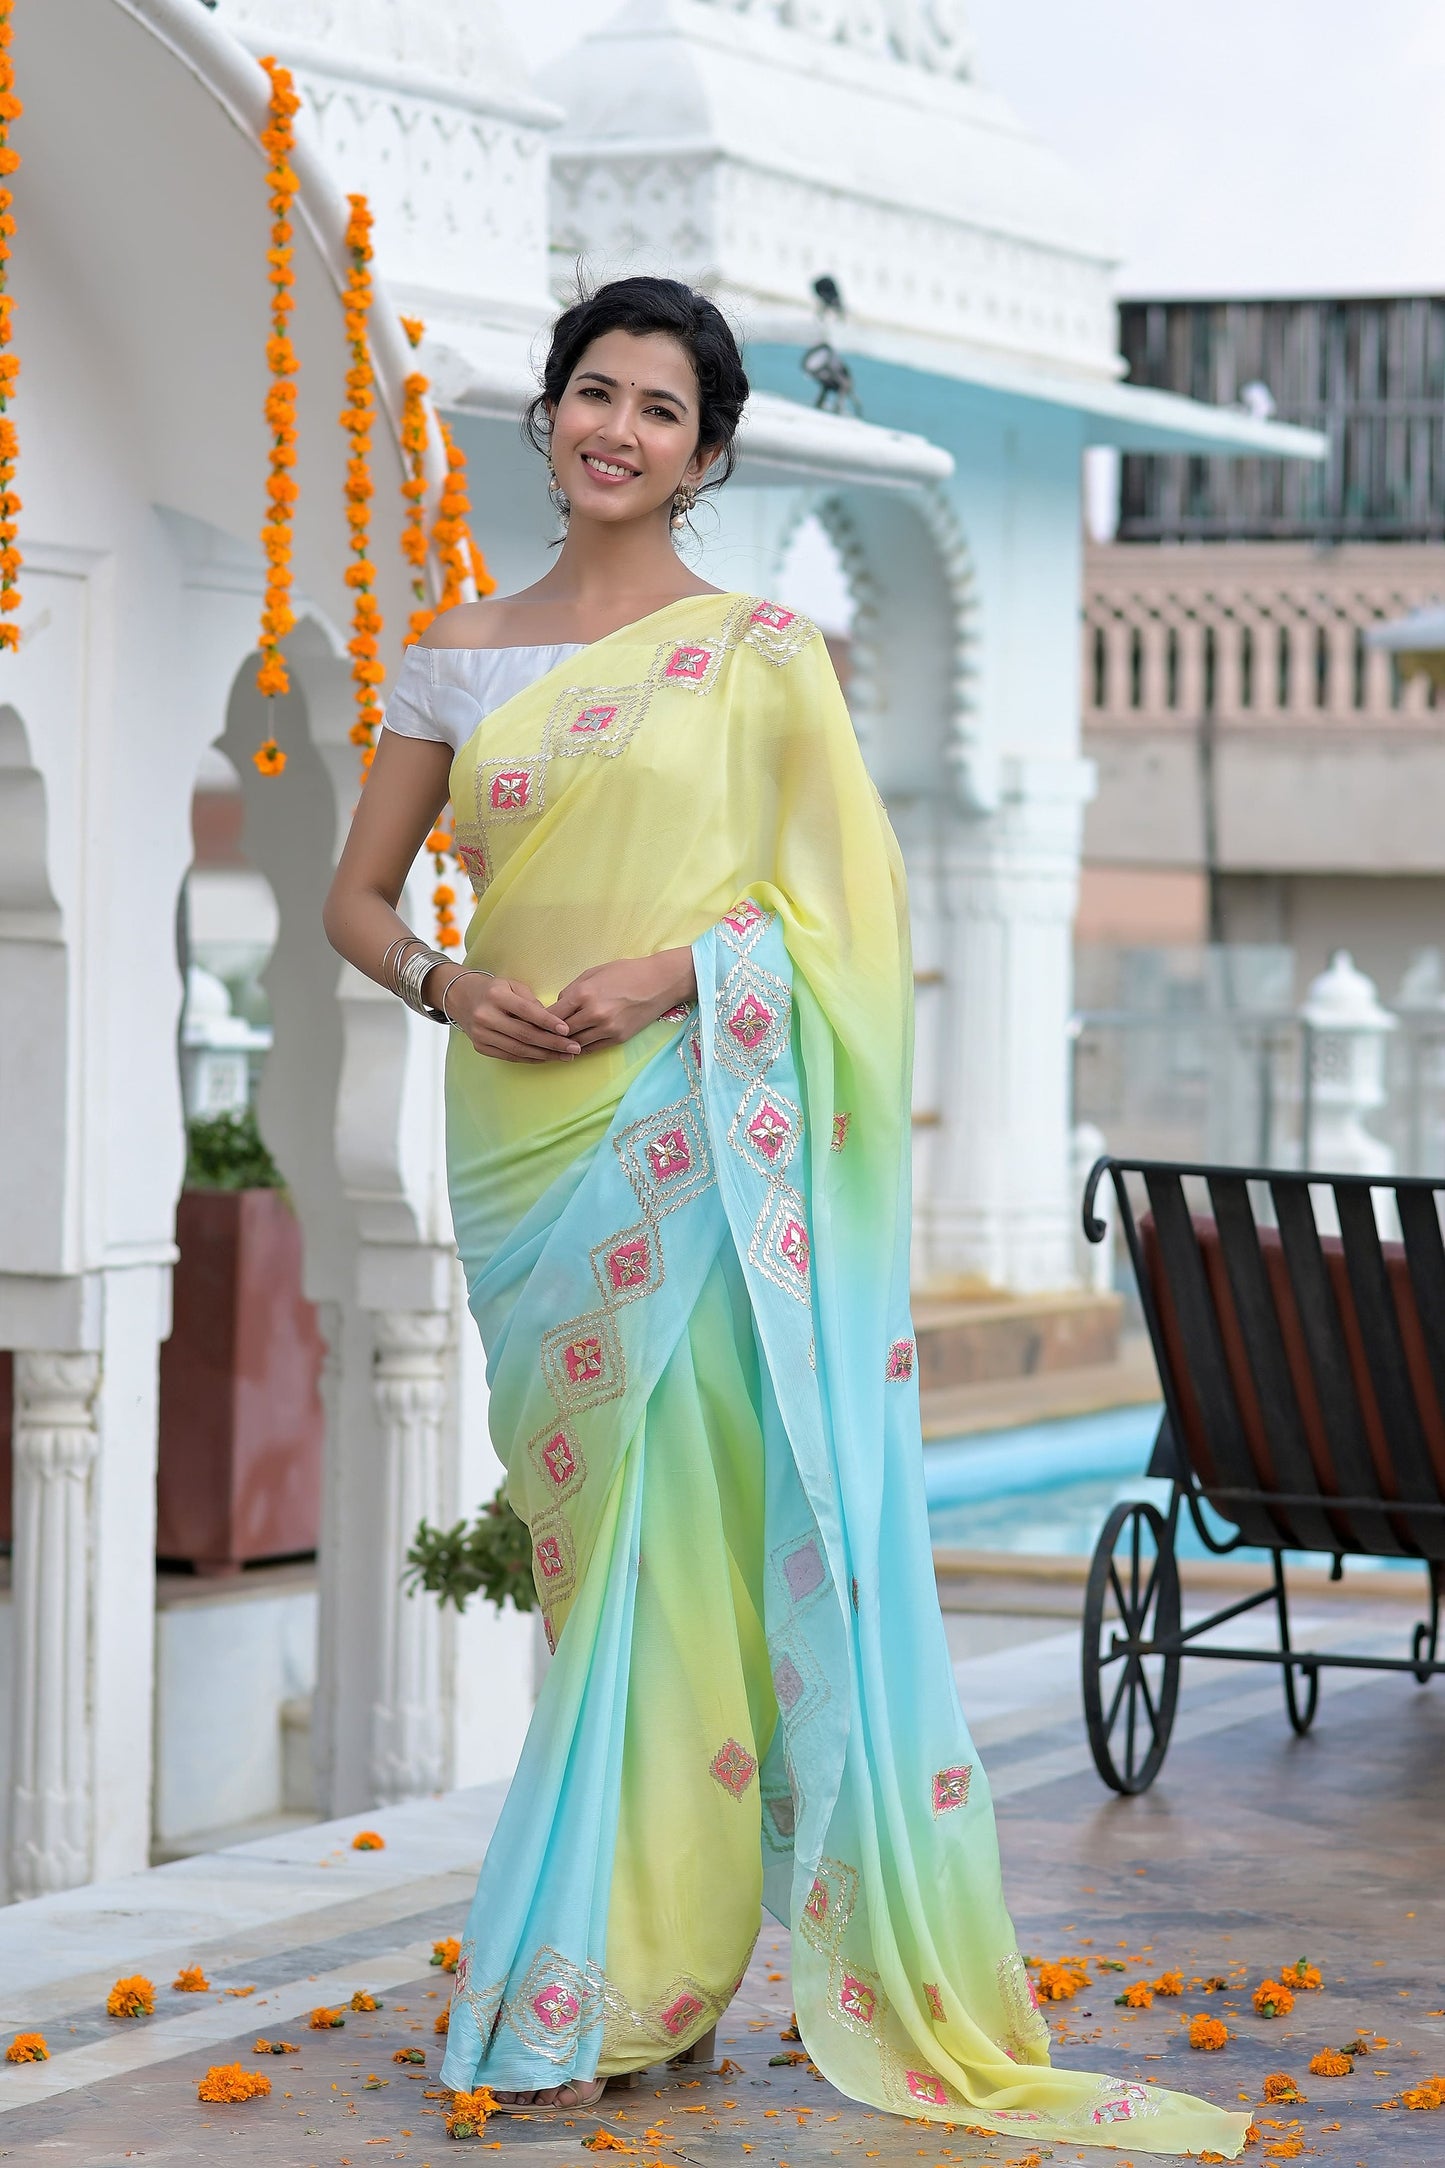 YELLOW AND BLUE SAREE - www.styletriggers.com